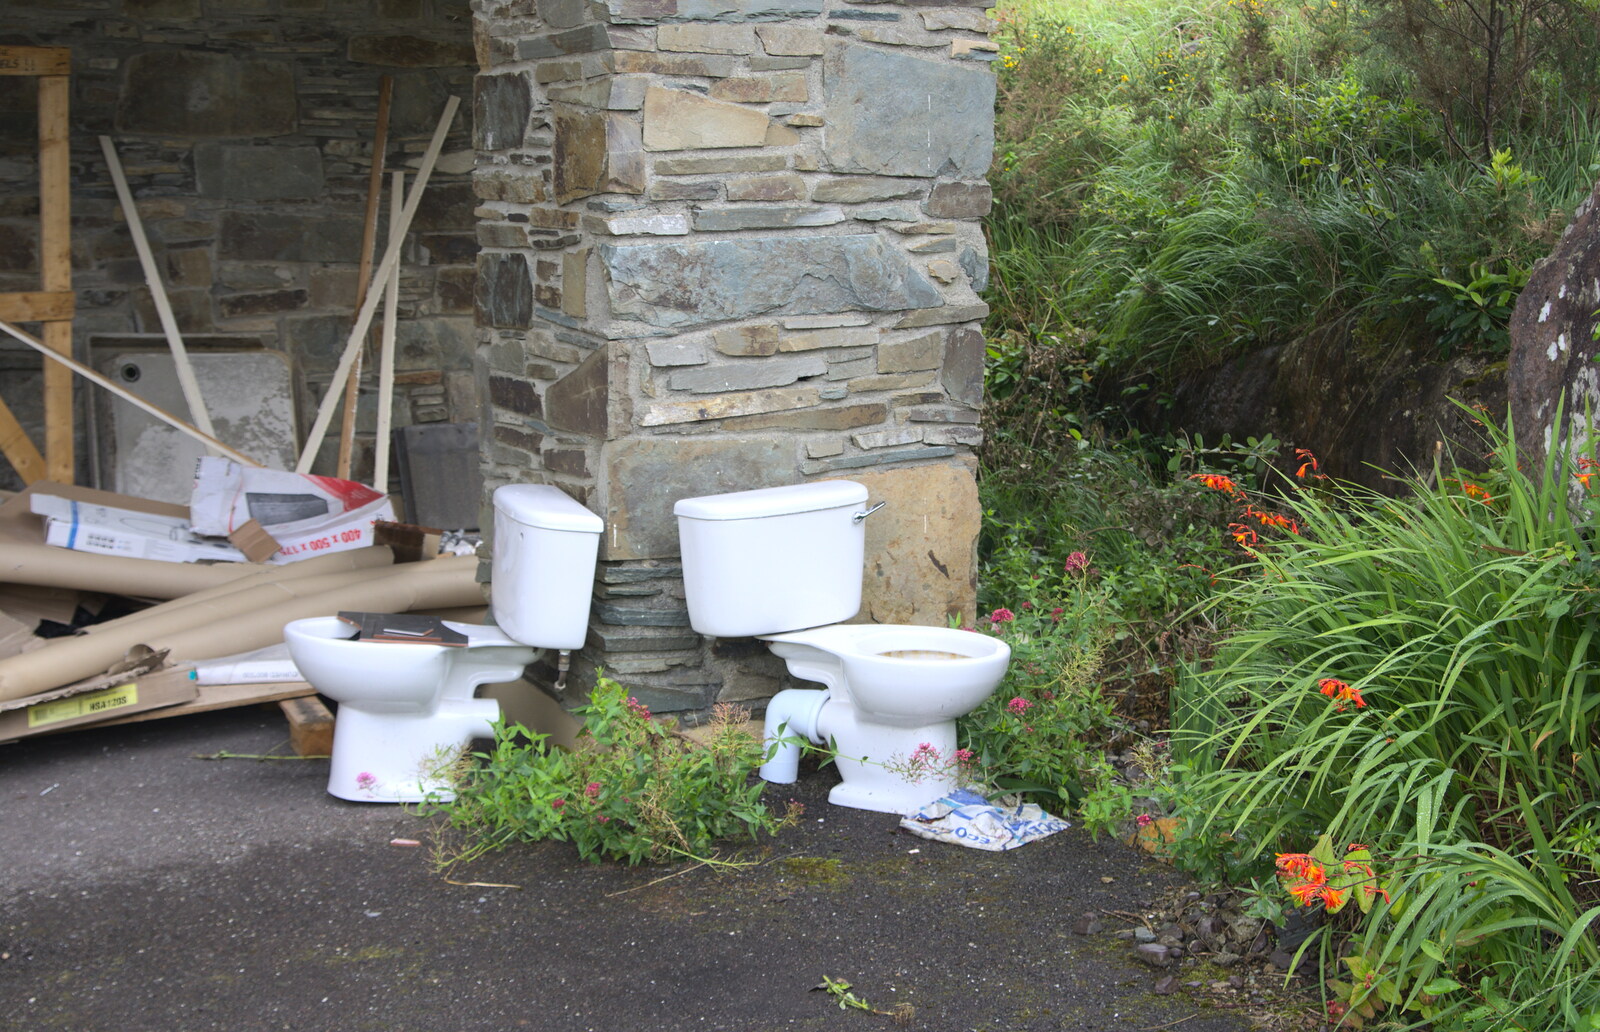 A couple of convenient outside toilets from In The Sneem, An tSnaidhm, Kerry, Ireland - 1st August 2017